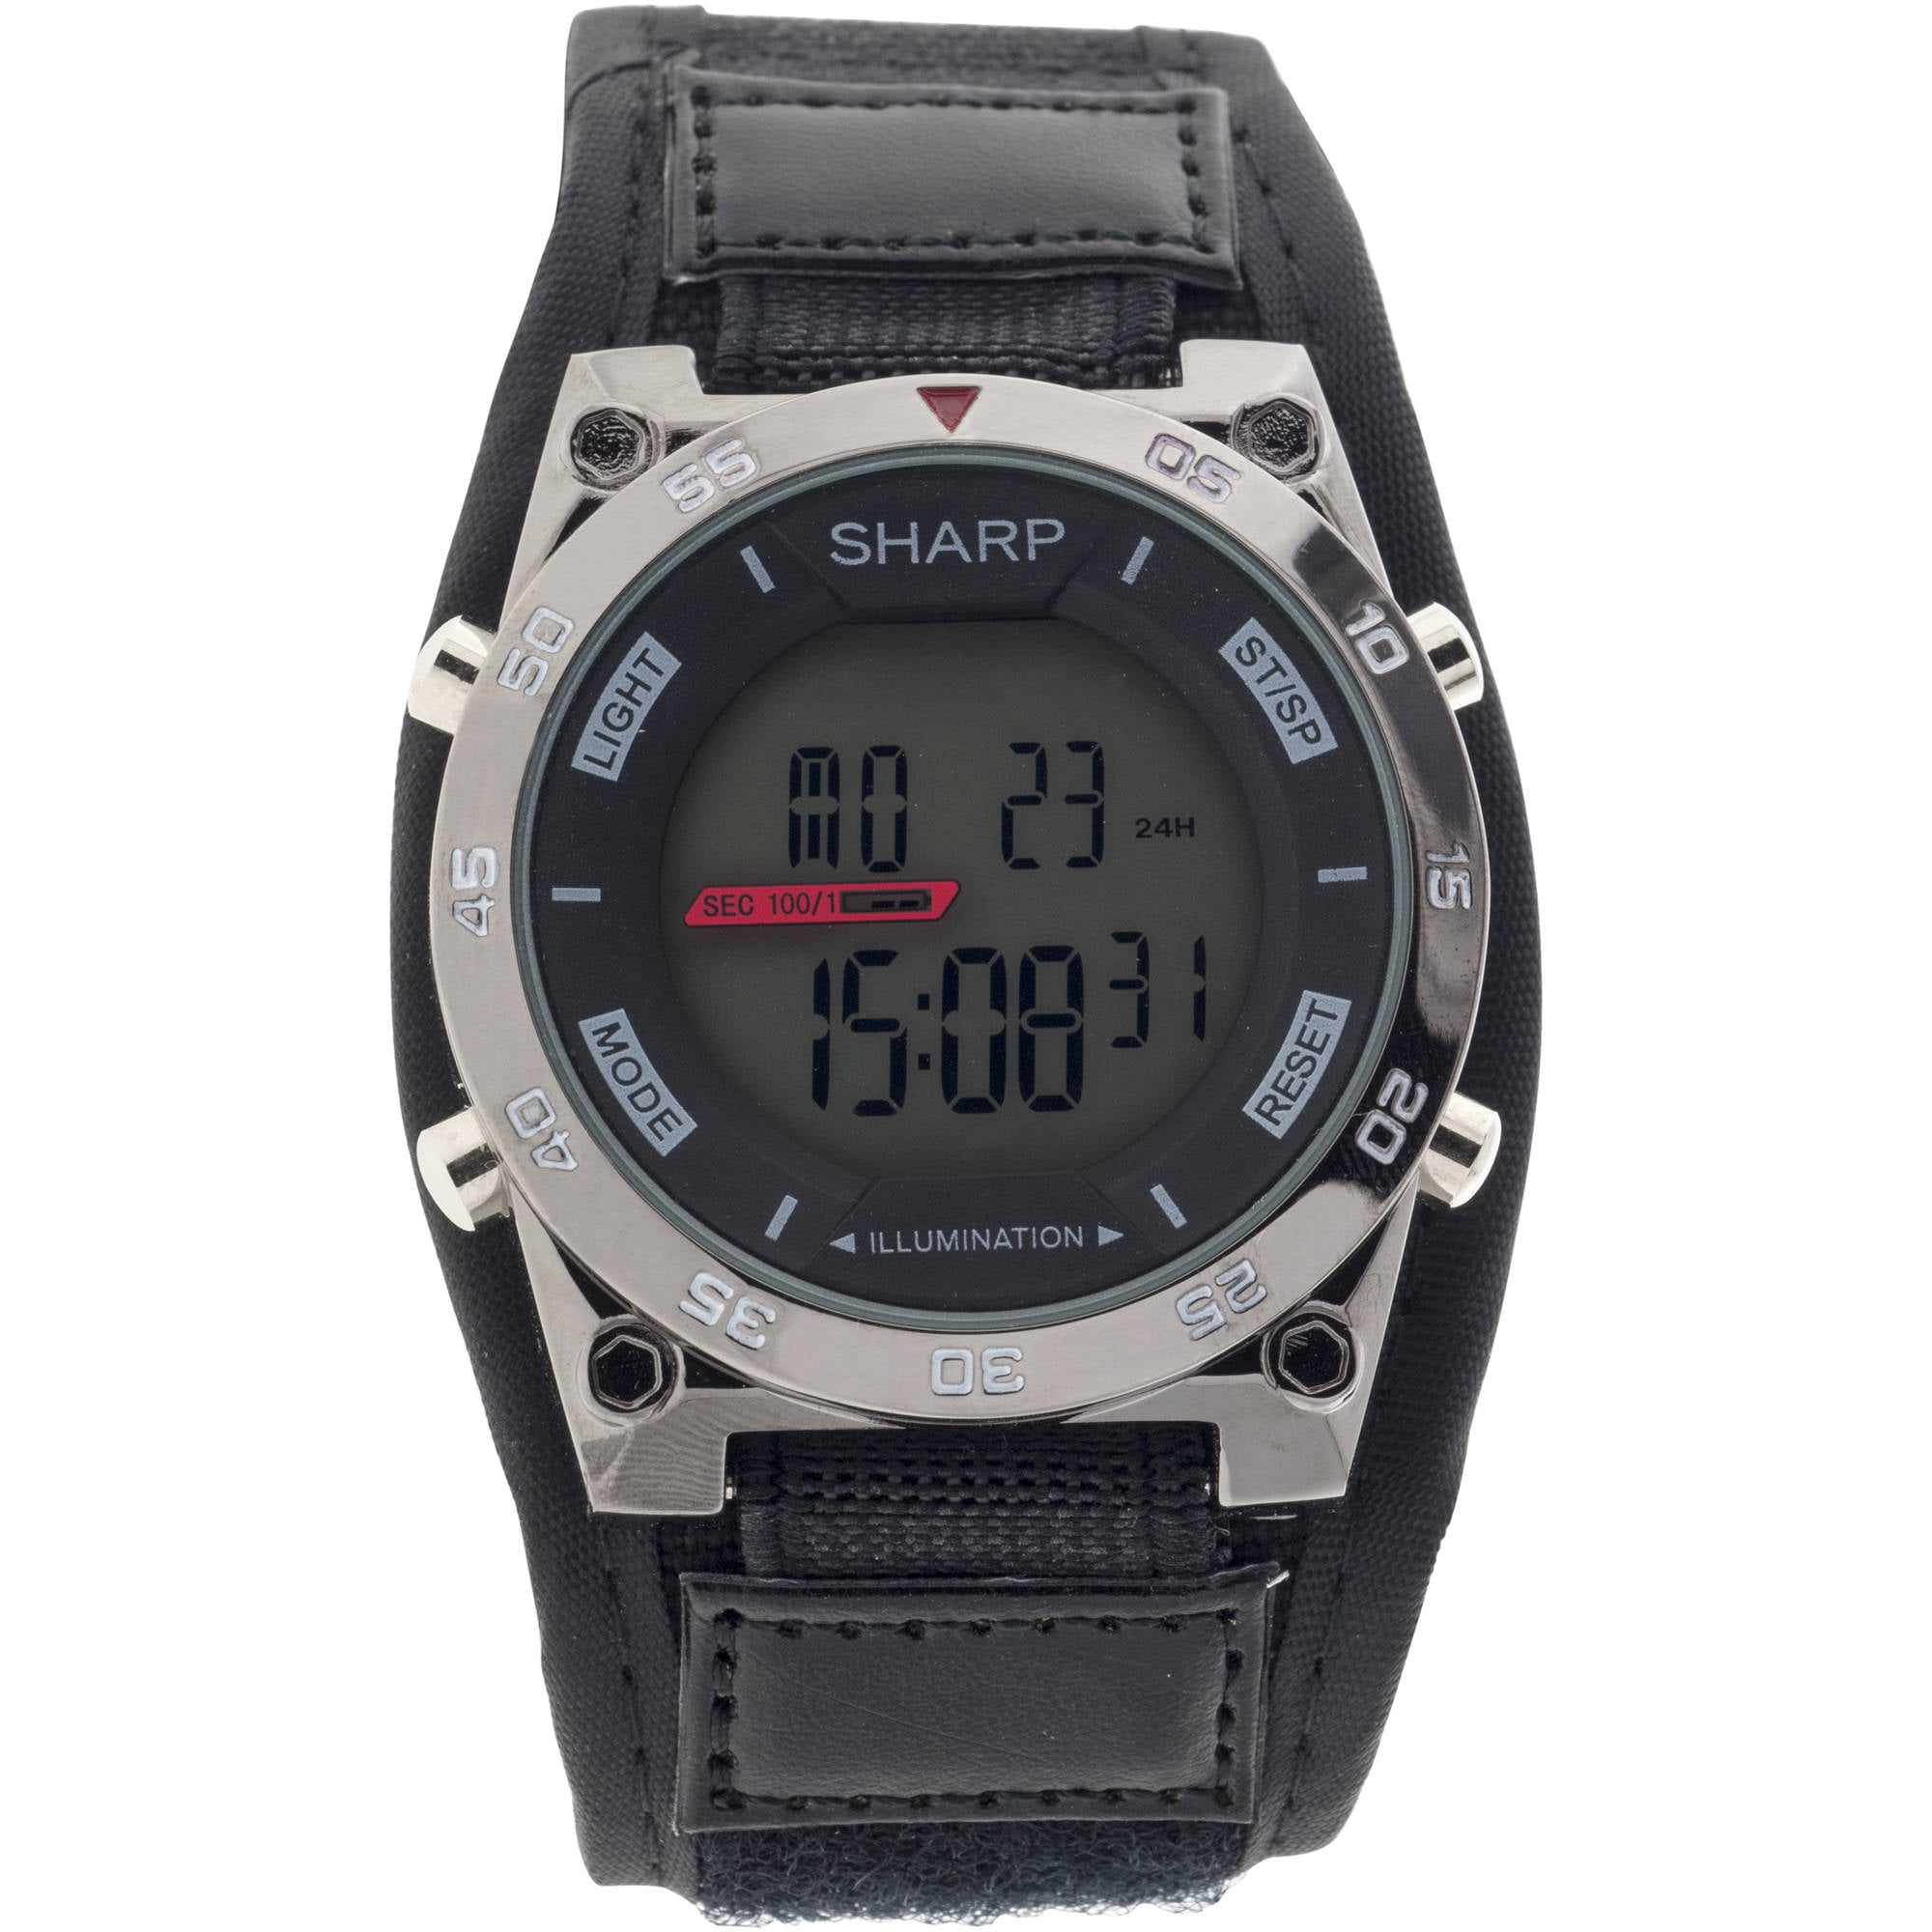 Men's Digital Watch With Velcro Band | lupon.gov.ph